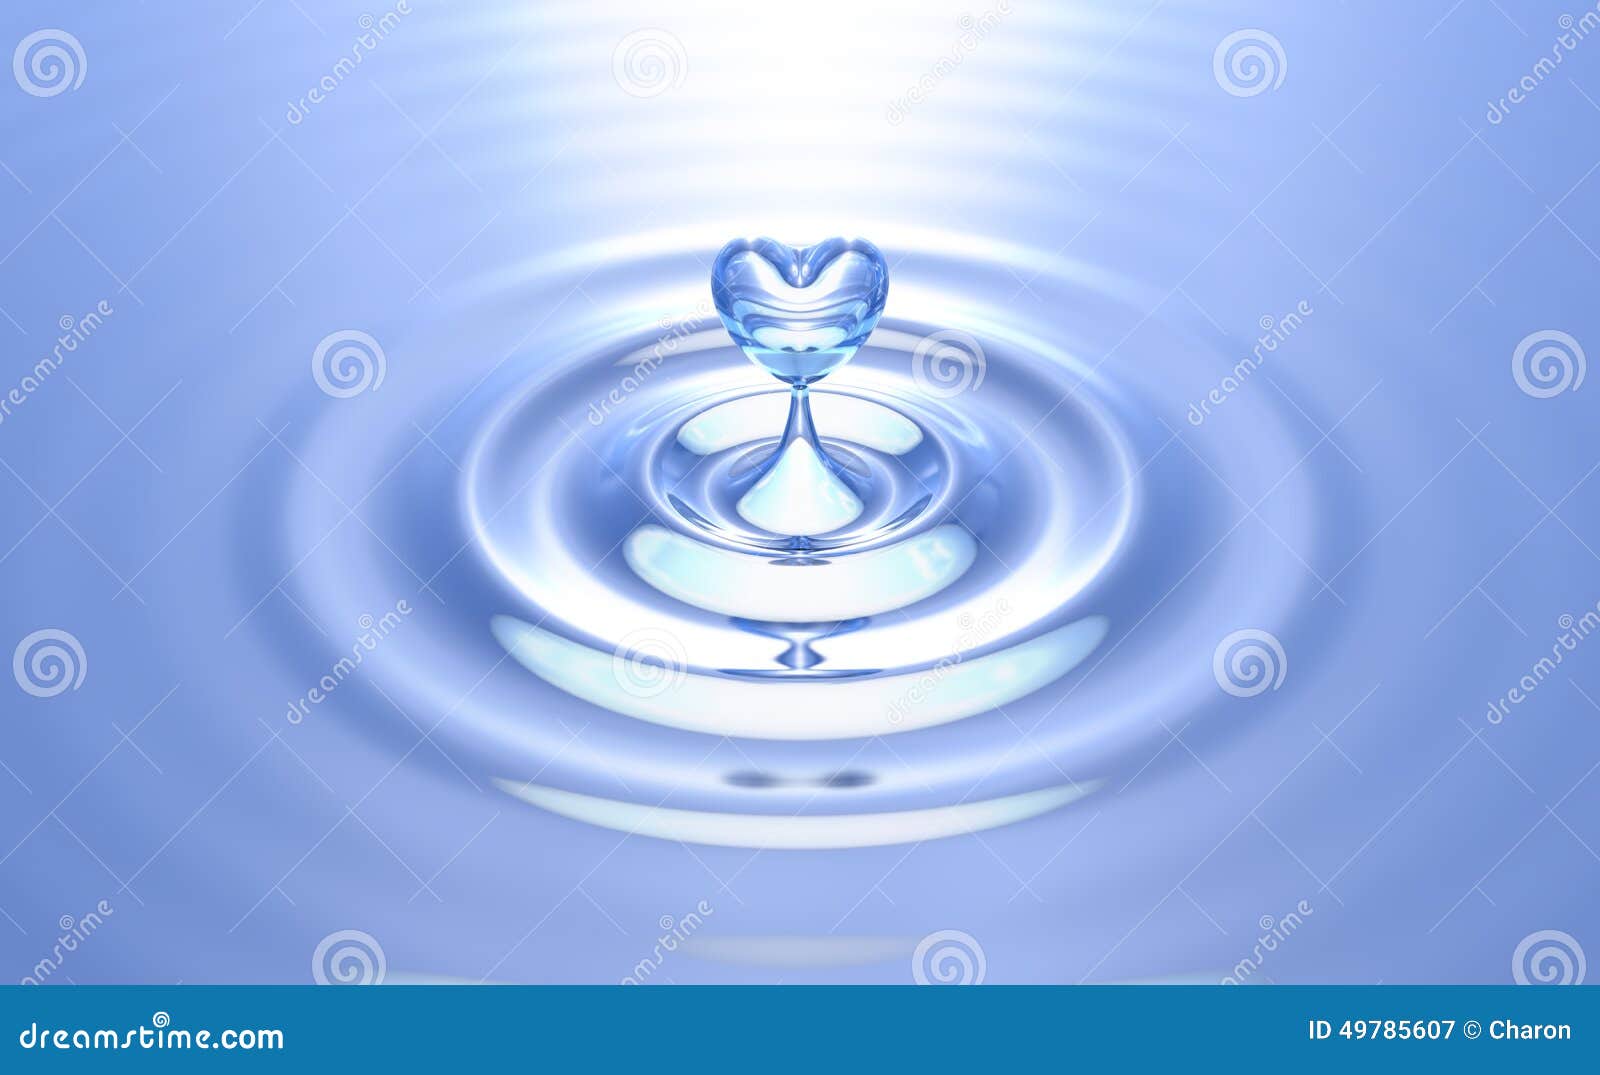 pure heart water splash with ripples